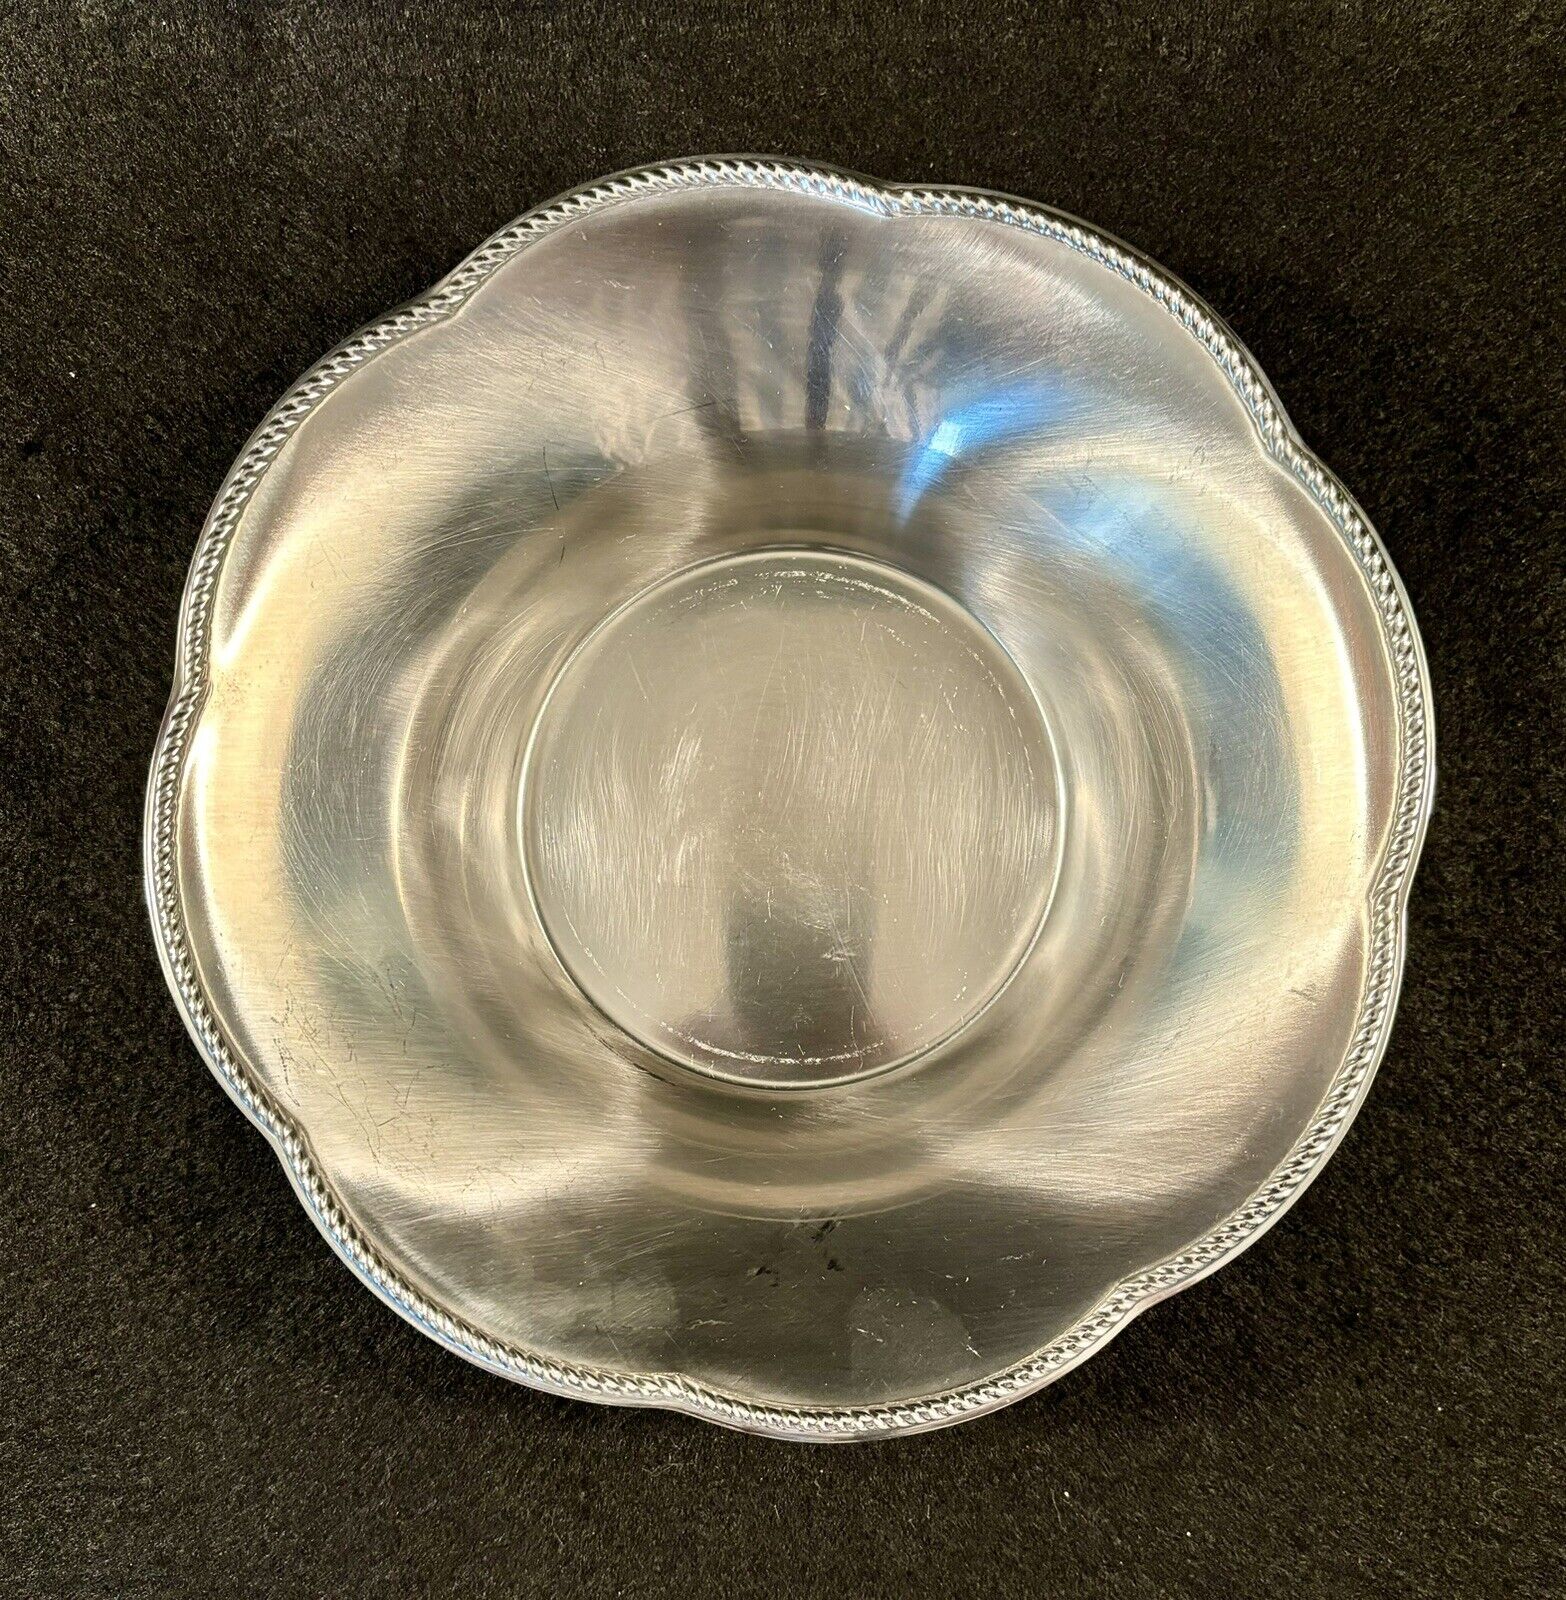 Vintage Alfra Alessi Italy Fruit Bowl Stainless Steel 18/10 Round 8 3/8” X 2”